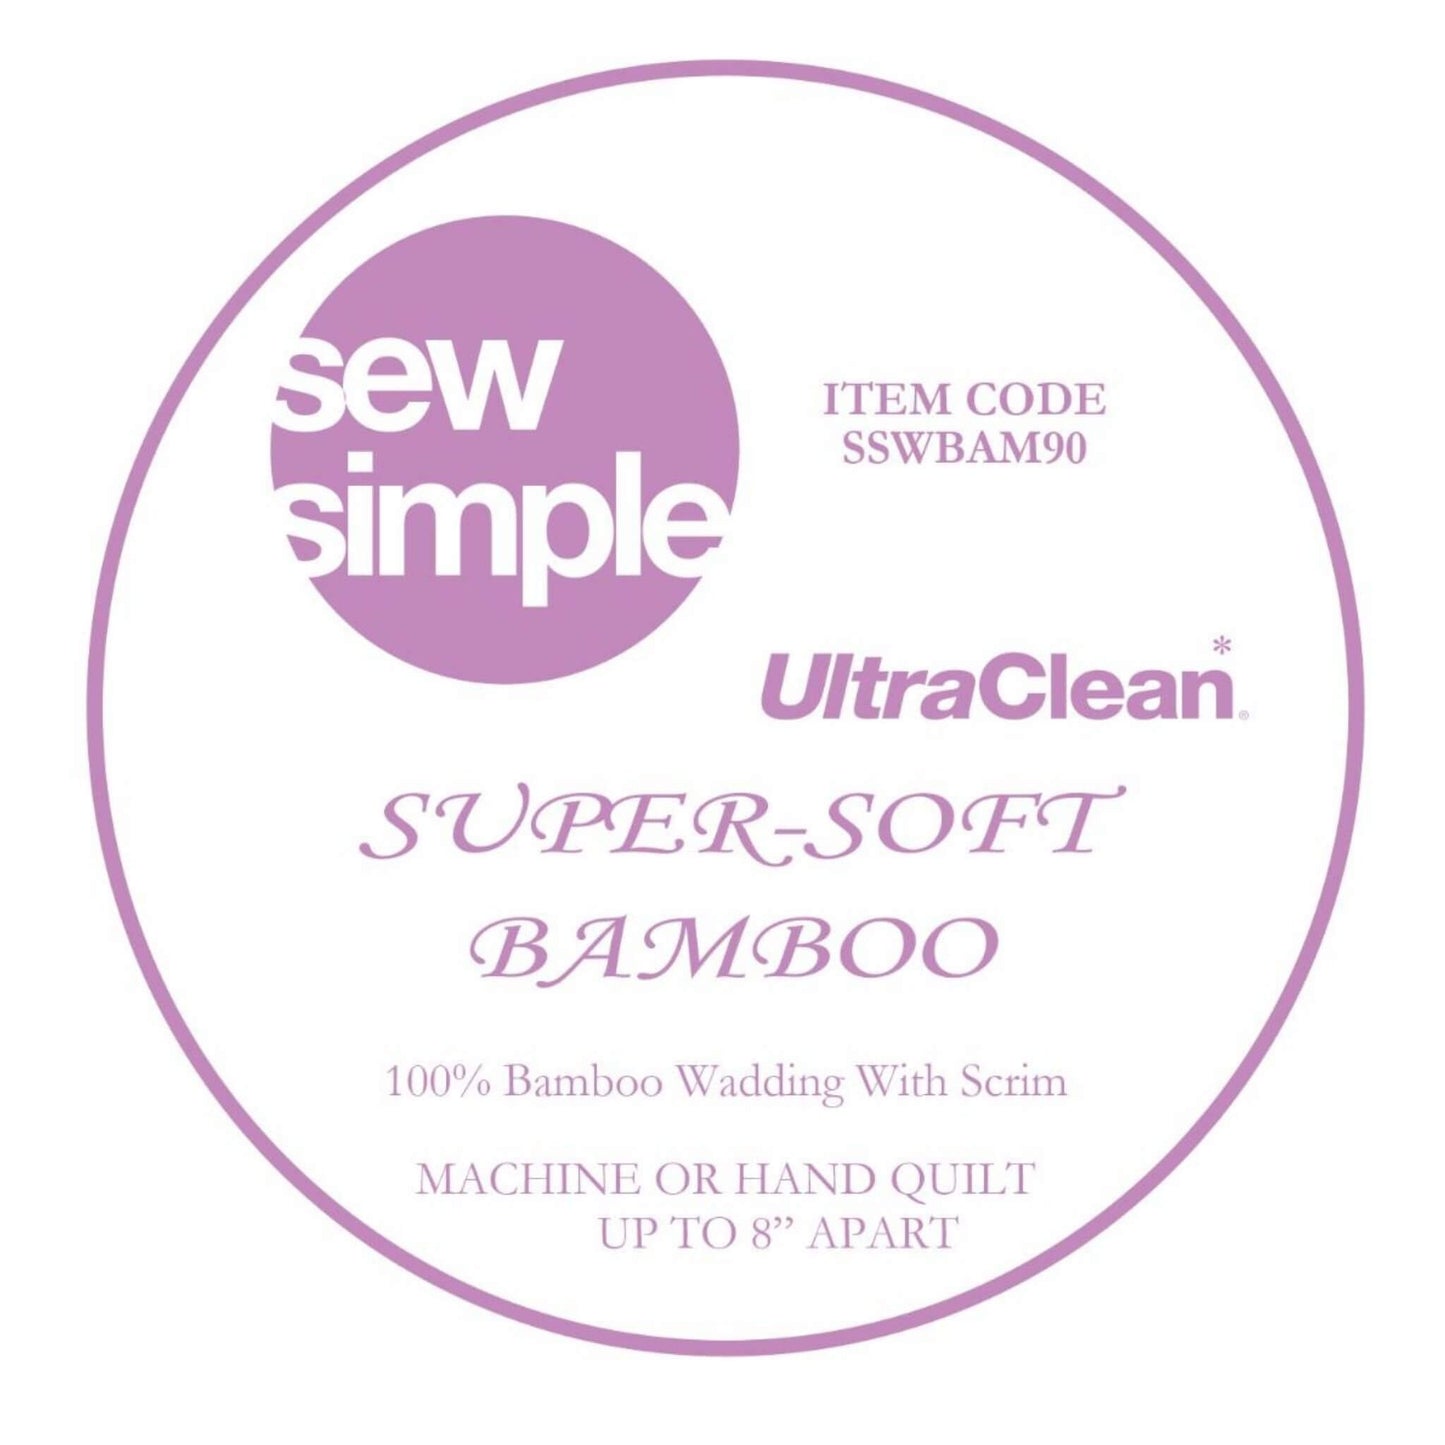 Super-Soft Bamboo Wadding - Sew Simple - 90" Wide